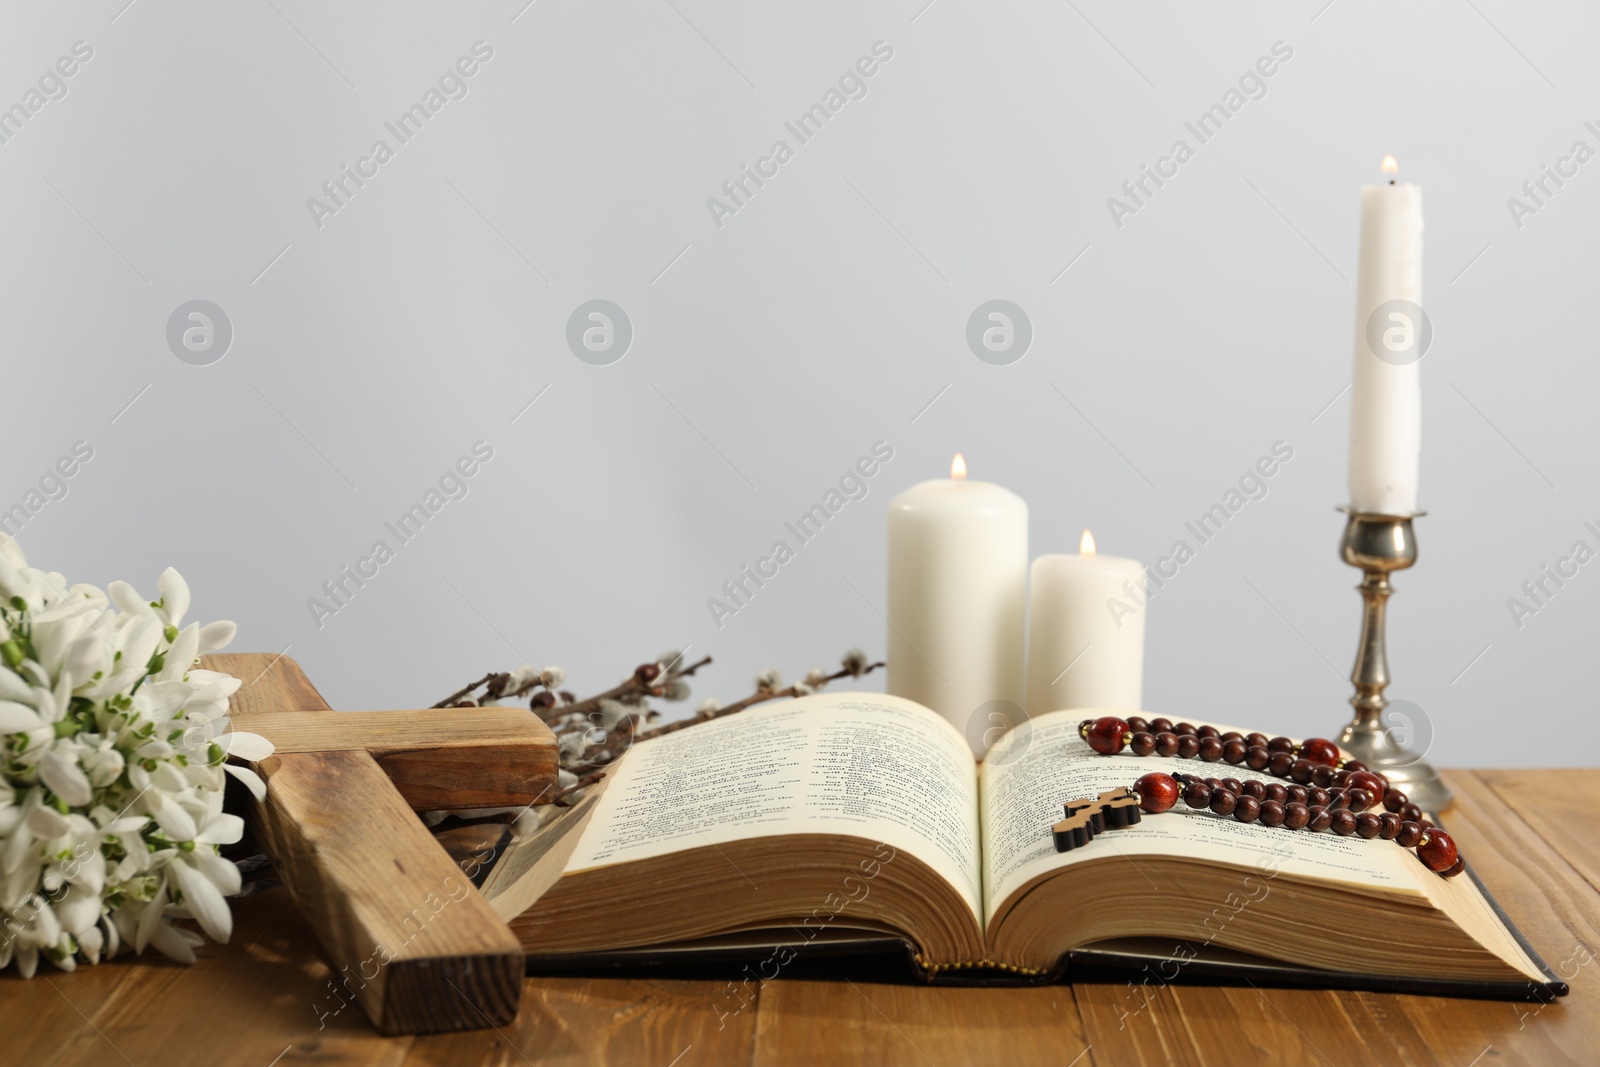 Photo of Church candles, cross, rosary beads, Bible, snowdrops and willow branches on wooden table against light background